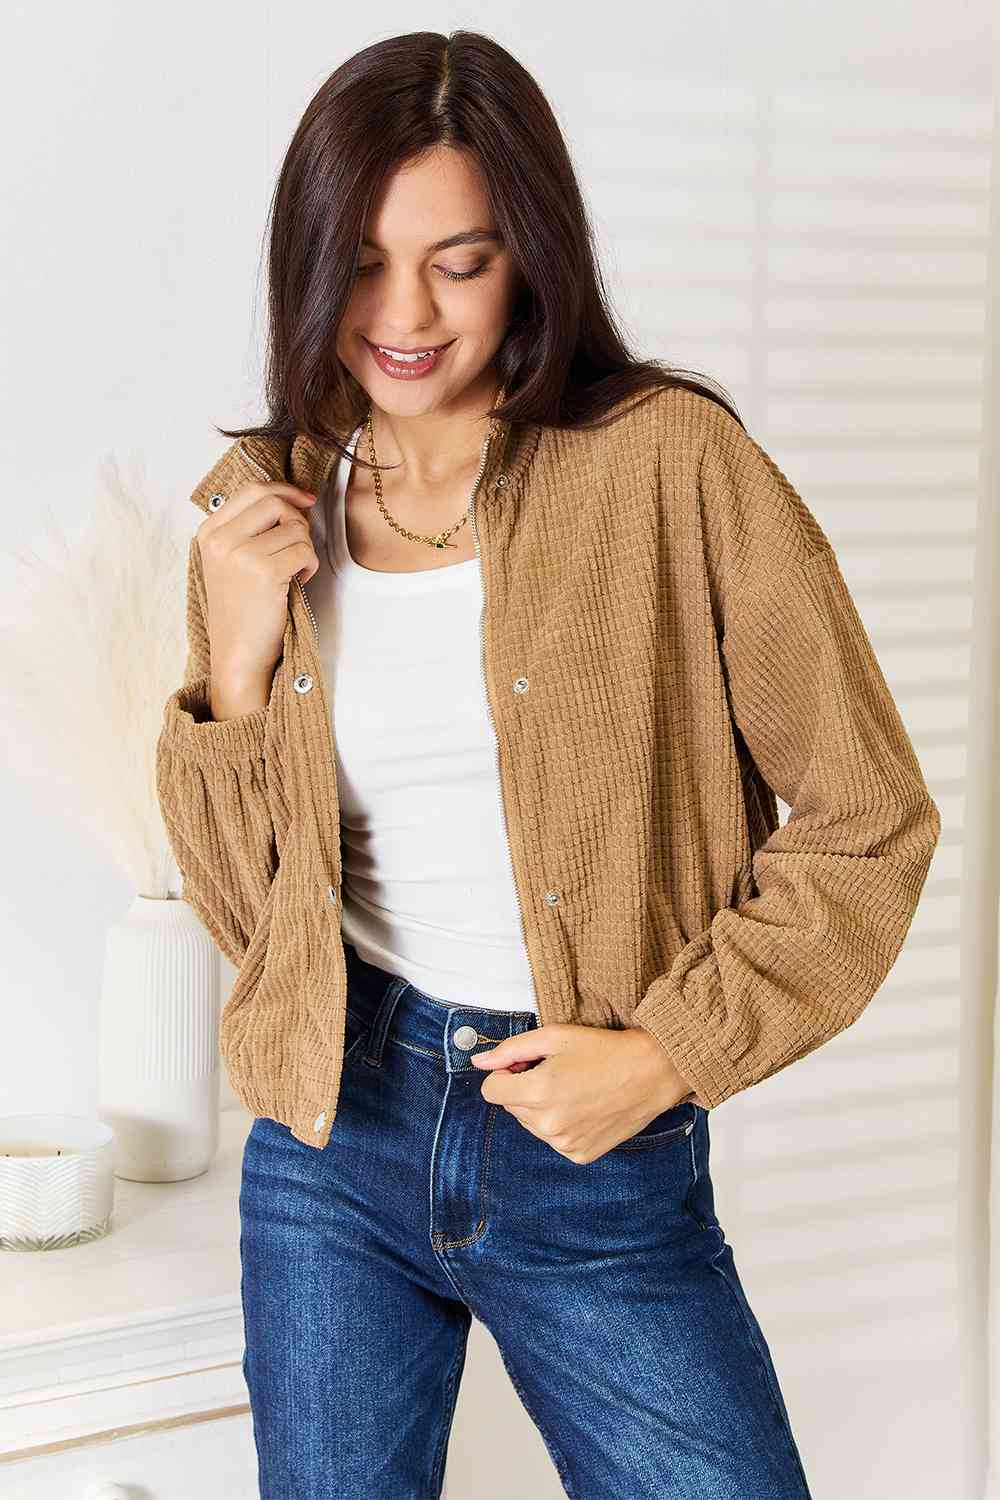 Long Sleeve Dropped Shoulder Jacket - Kawaii Stop - Comfortable Style, Cool Weather Fashion, Double Take, Dropped Shoulder, Easy Care, Effortless Chic, Fashionable Ensemble, Layering Piece, Long Sleeve Jacket, Polyester Blend, Ship from USA, Trendy Outerwear, Versatile Fashion, Wardrobe Essential